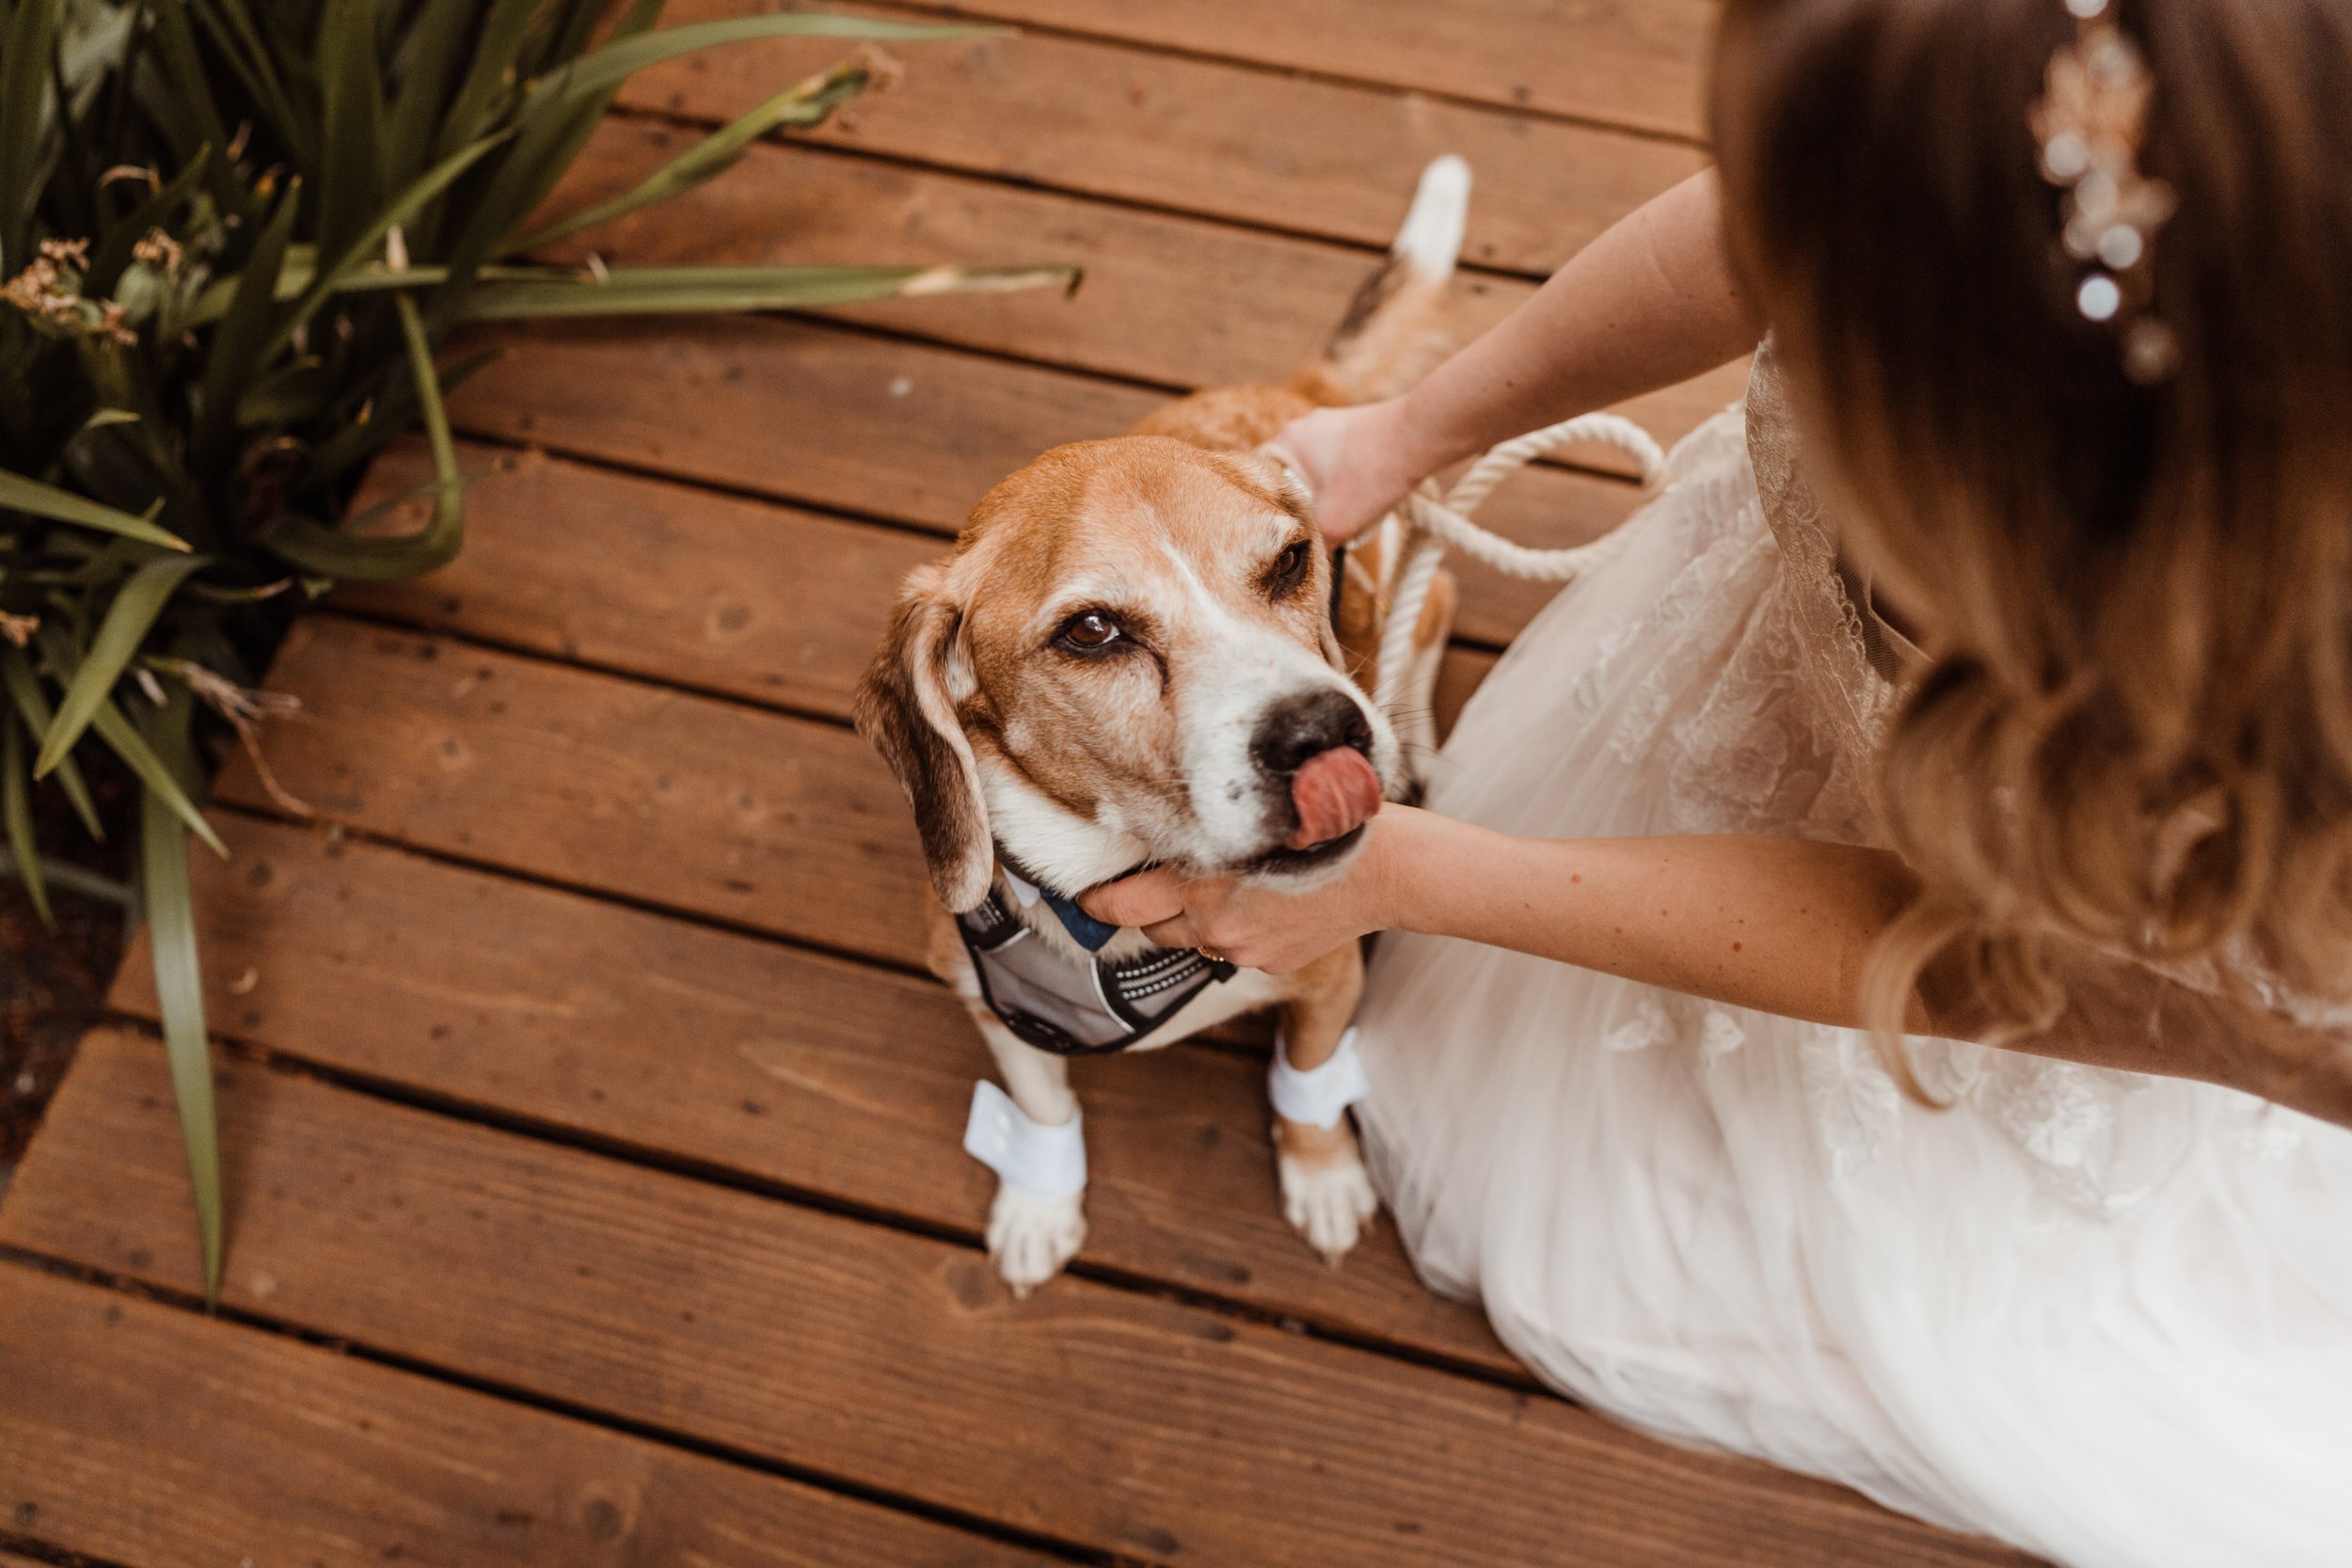 Wedding-in-the-Woods-Sweet-Moments-with-Senior-Beagle-in-Dog-Tuxedo-Bowtie (1).jpg